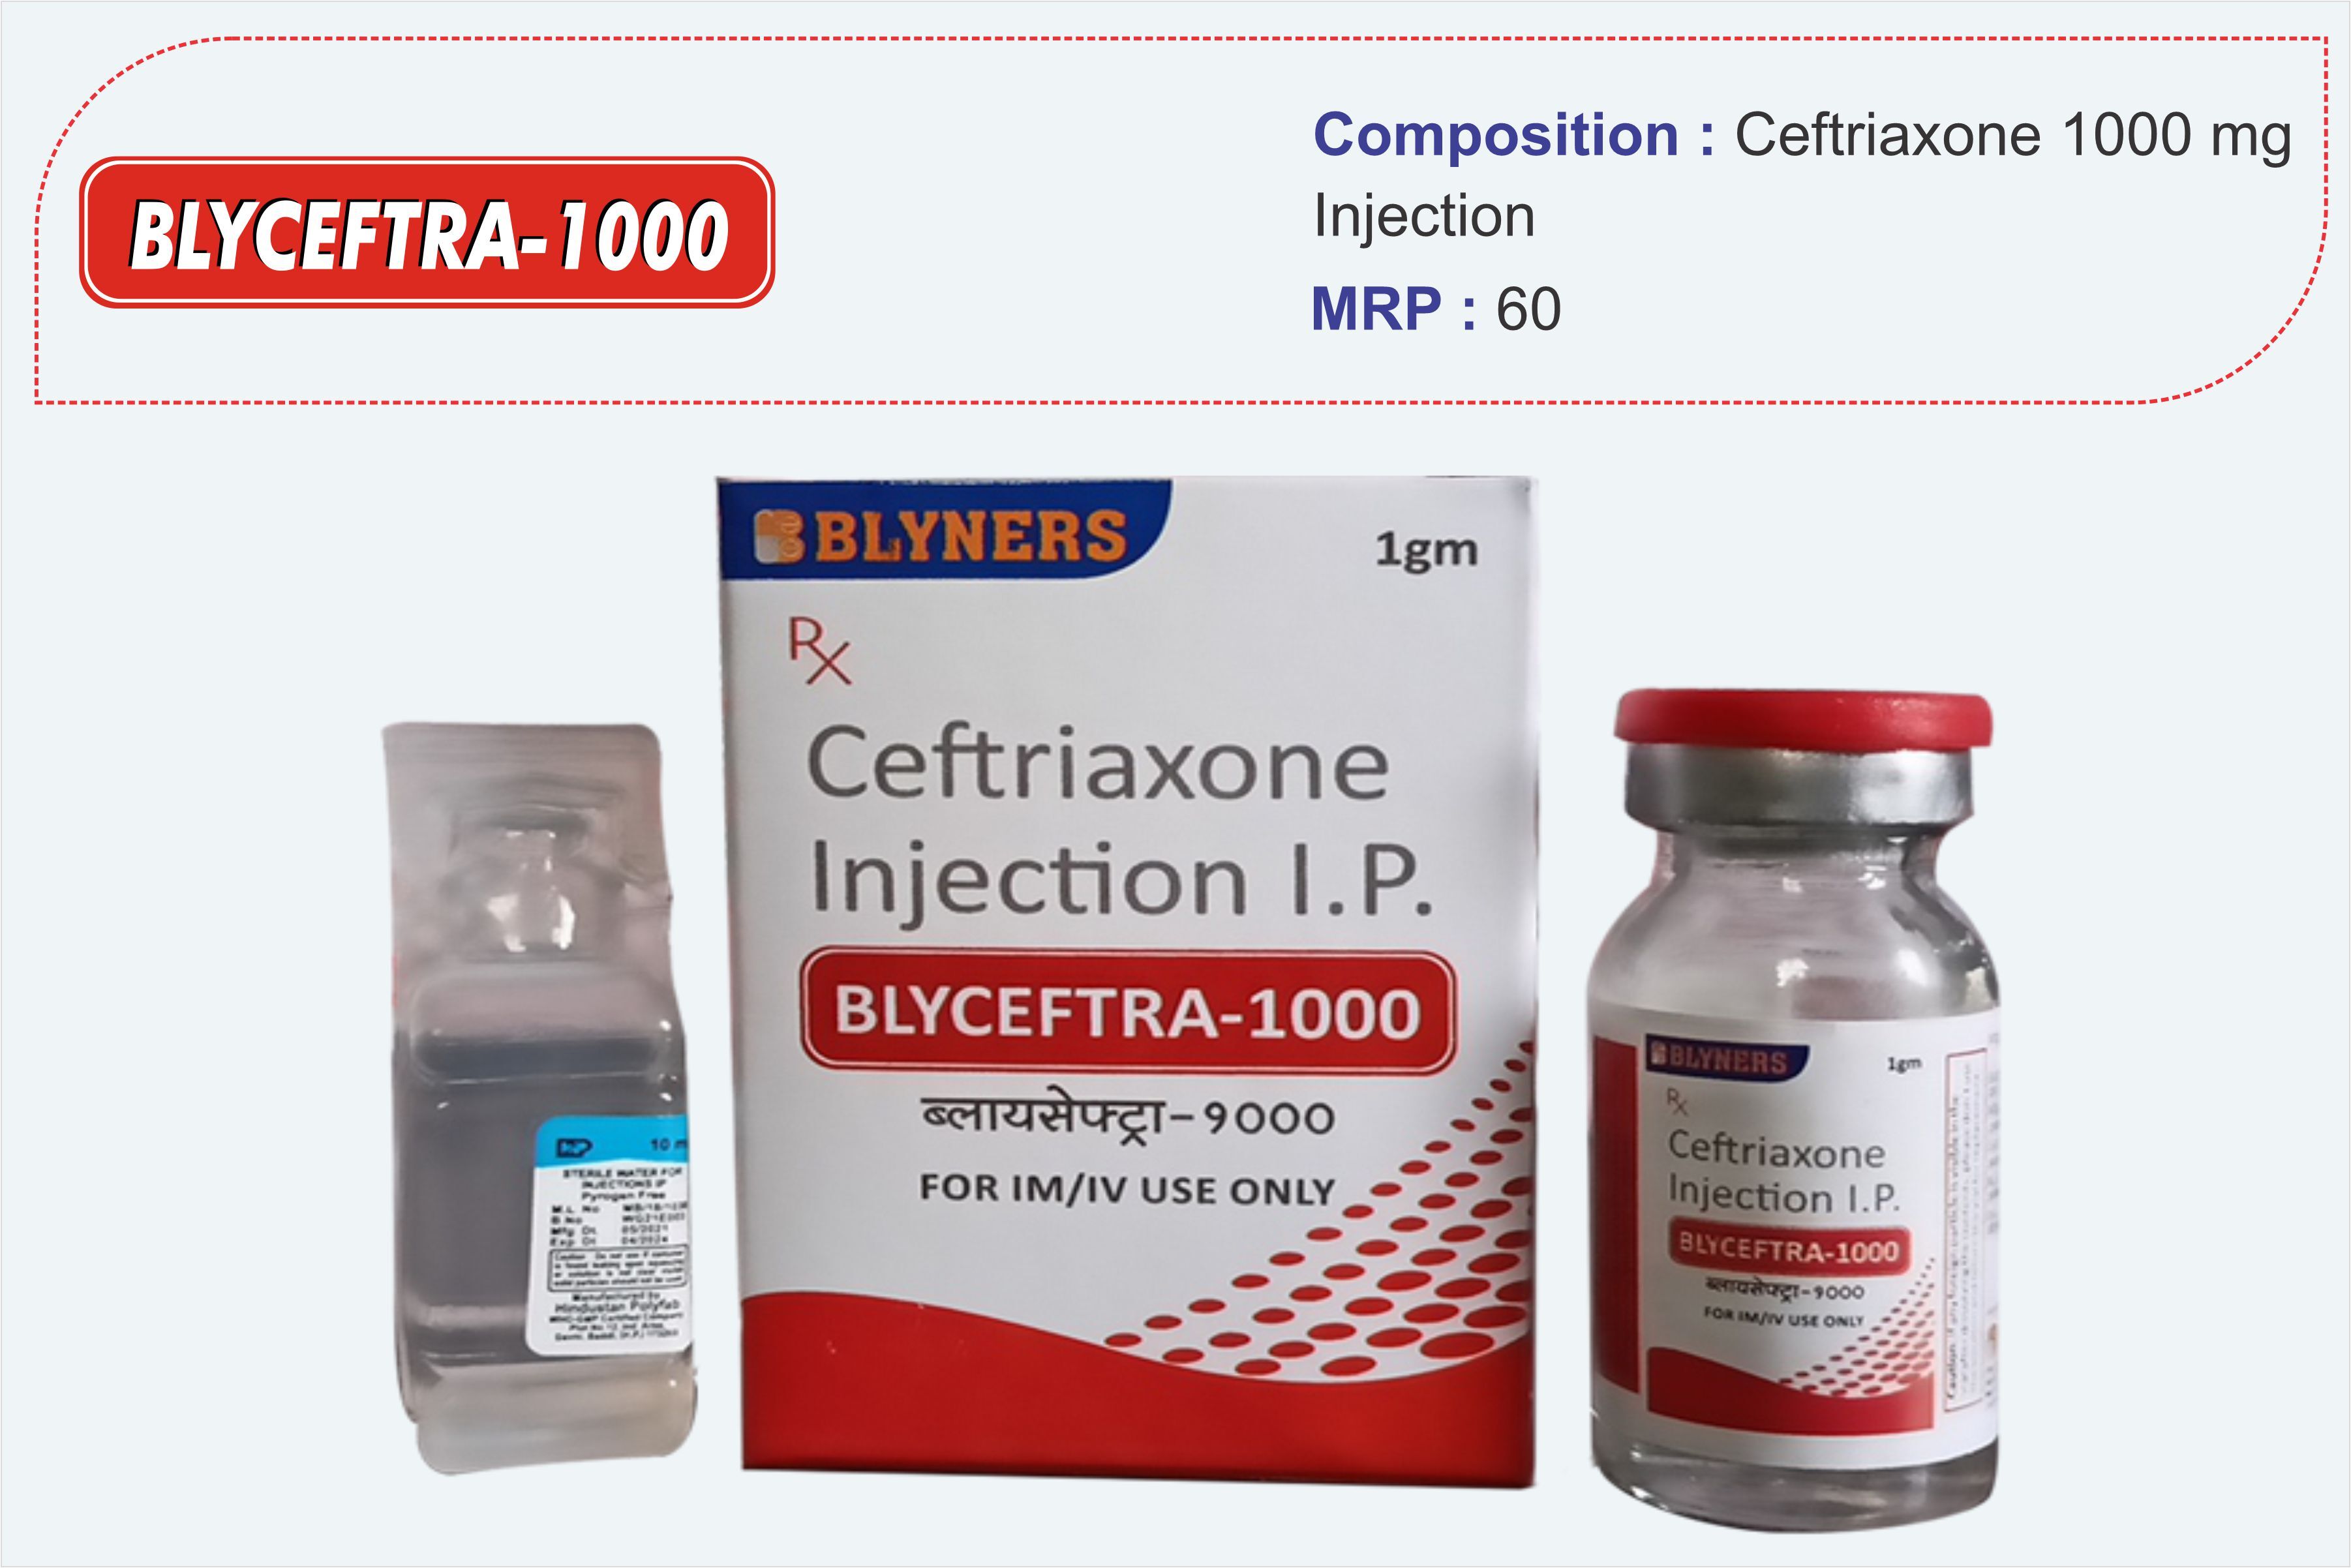 Ceftriaxone Injection 1000 mg